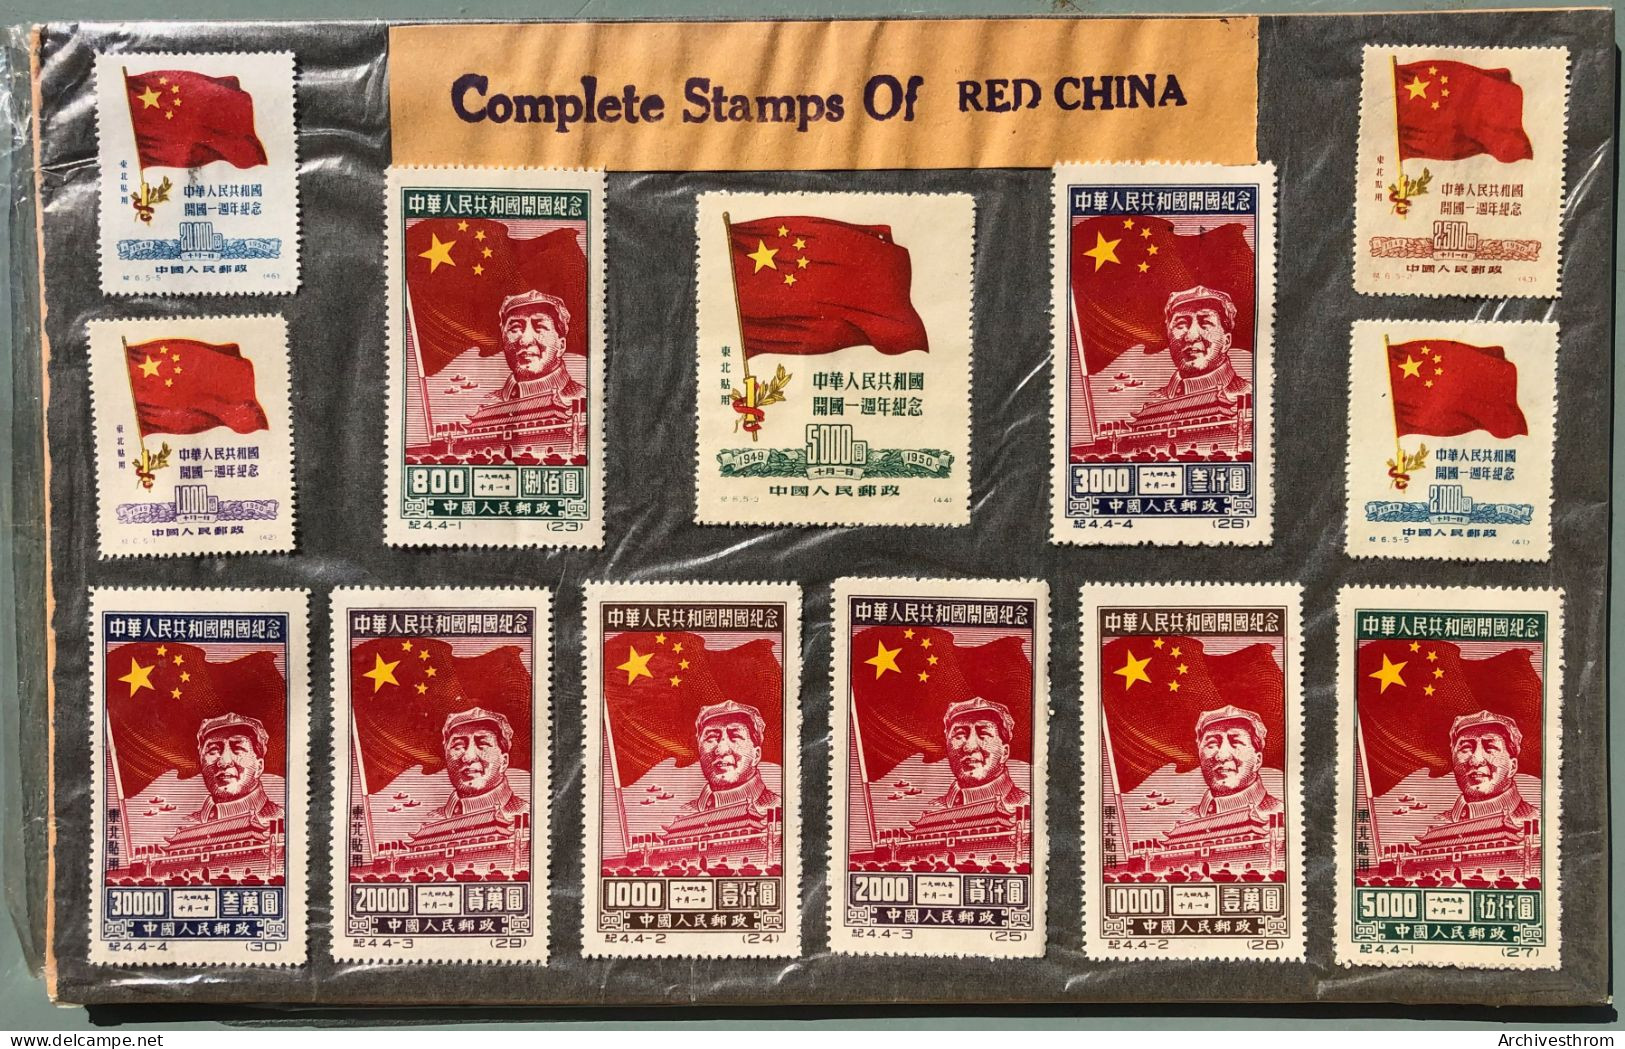 Complete Stamps Of Red China Under Cellophane - Unused Stamps